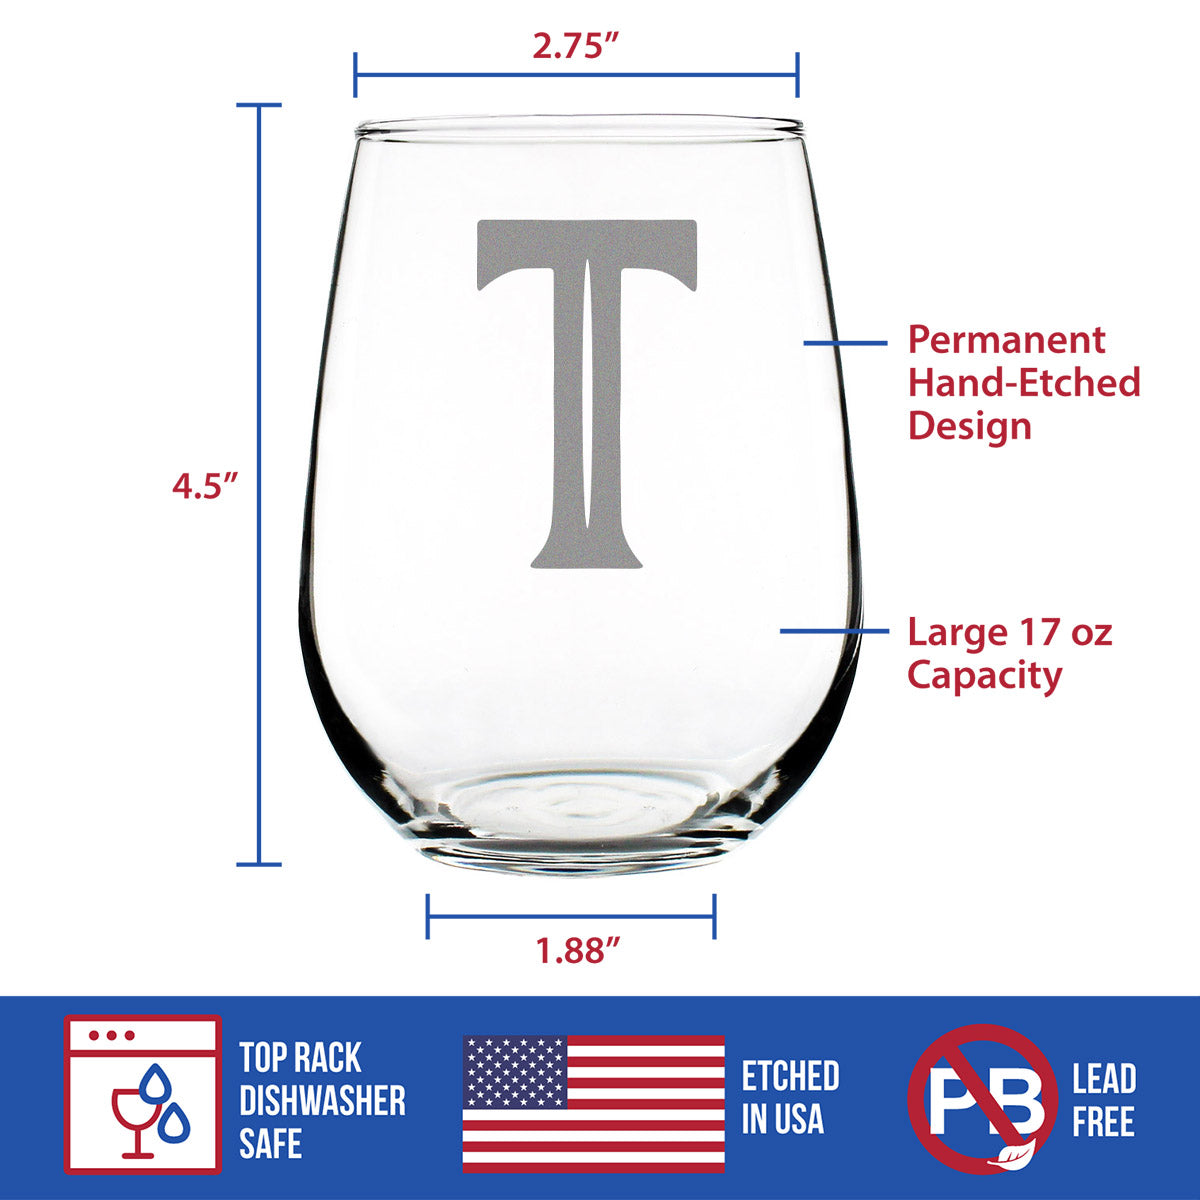 Monogram Bold Letter T - Stemless Wine Glass - Personalized Gifts for Women and Men - Large Engraved Glasses